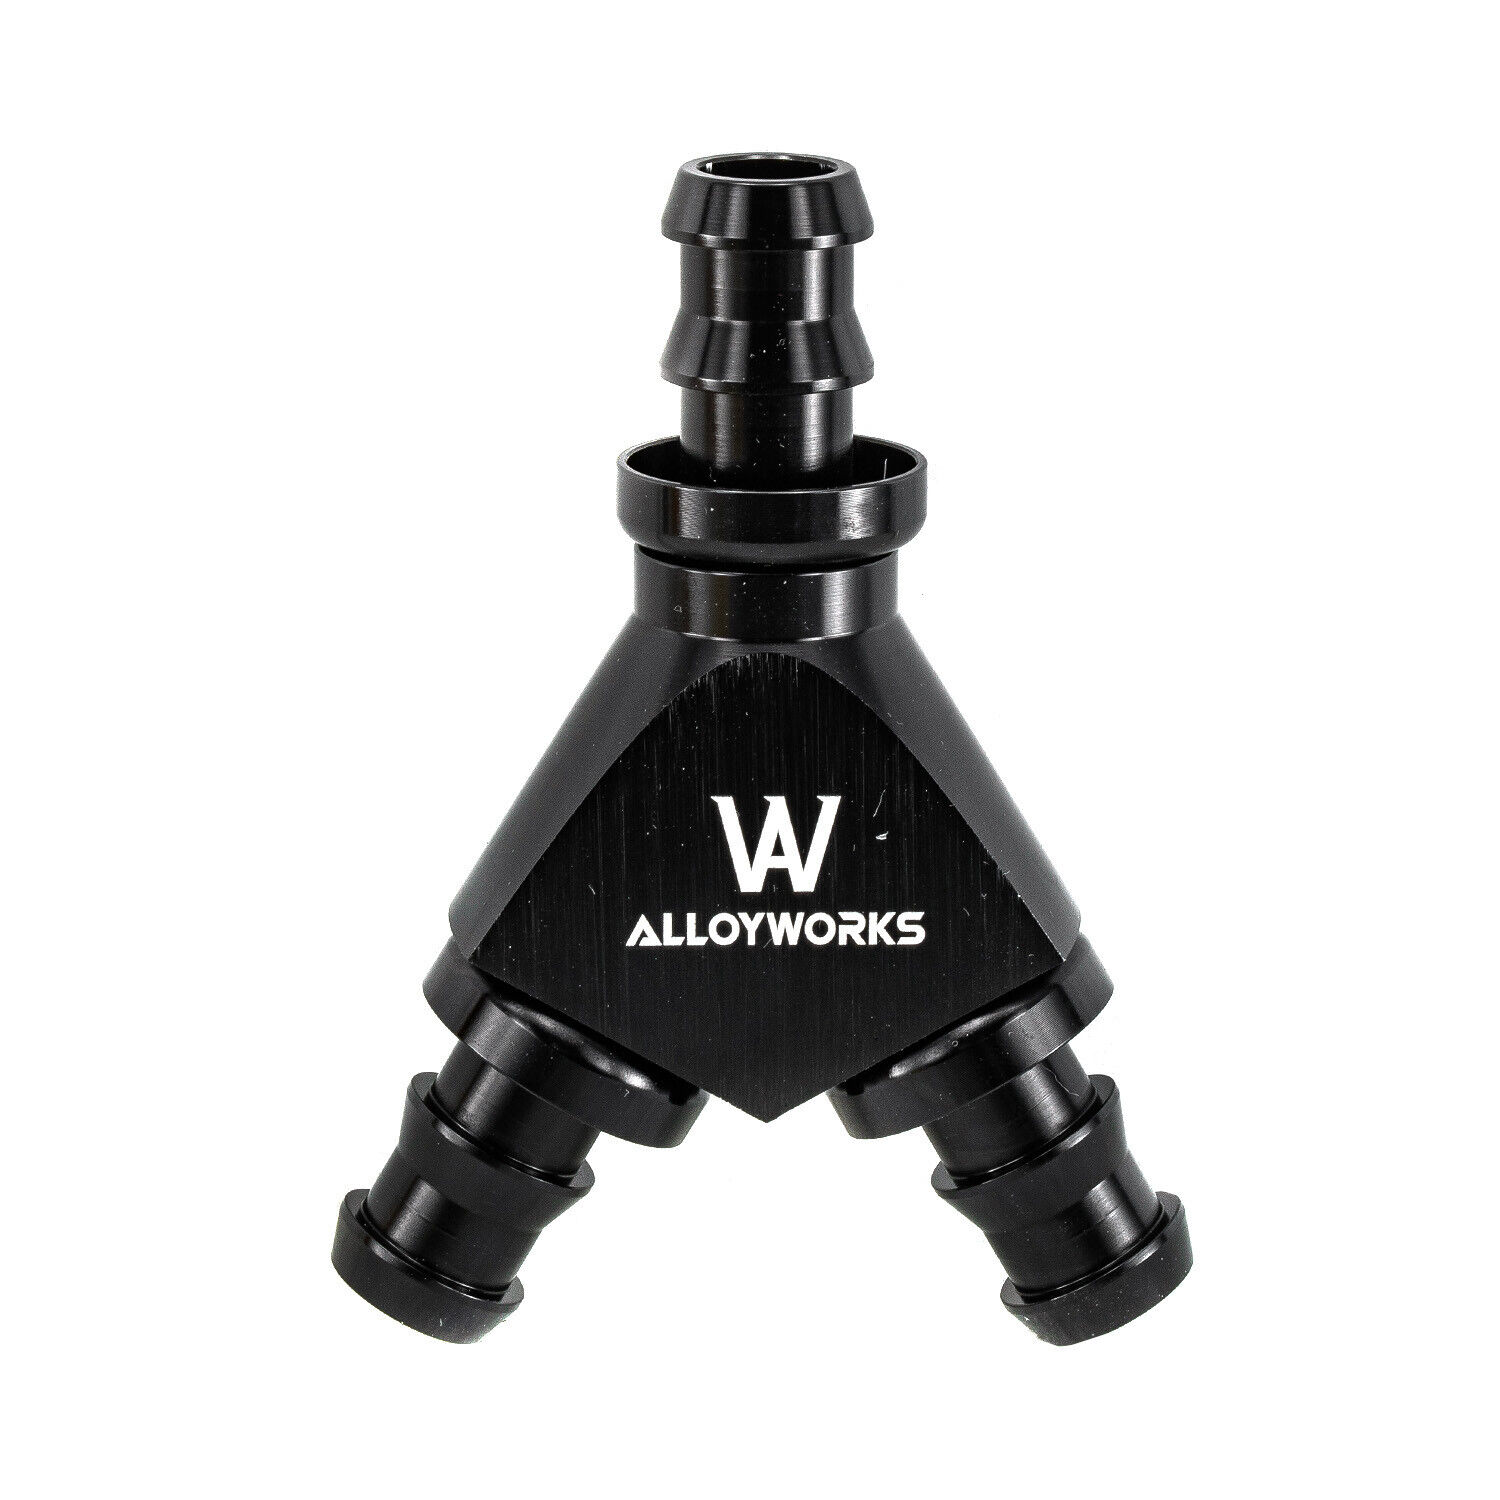 3/8 inch Black Anodized Aluminum Y Barbed Fitting Adapter 3-Way Split